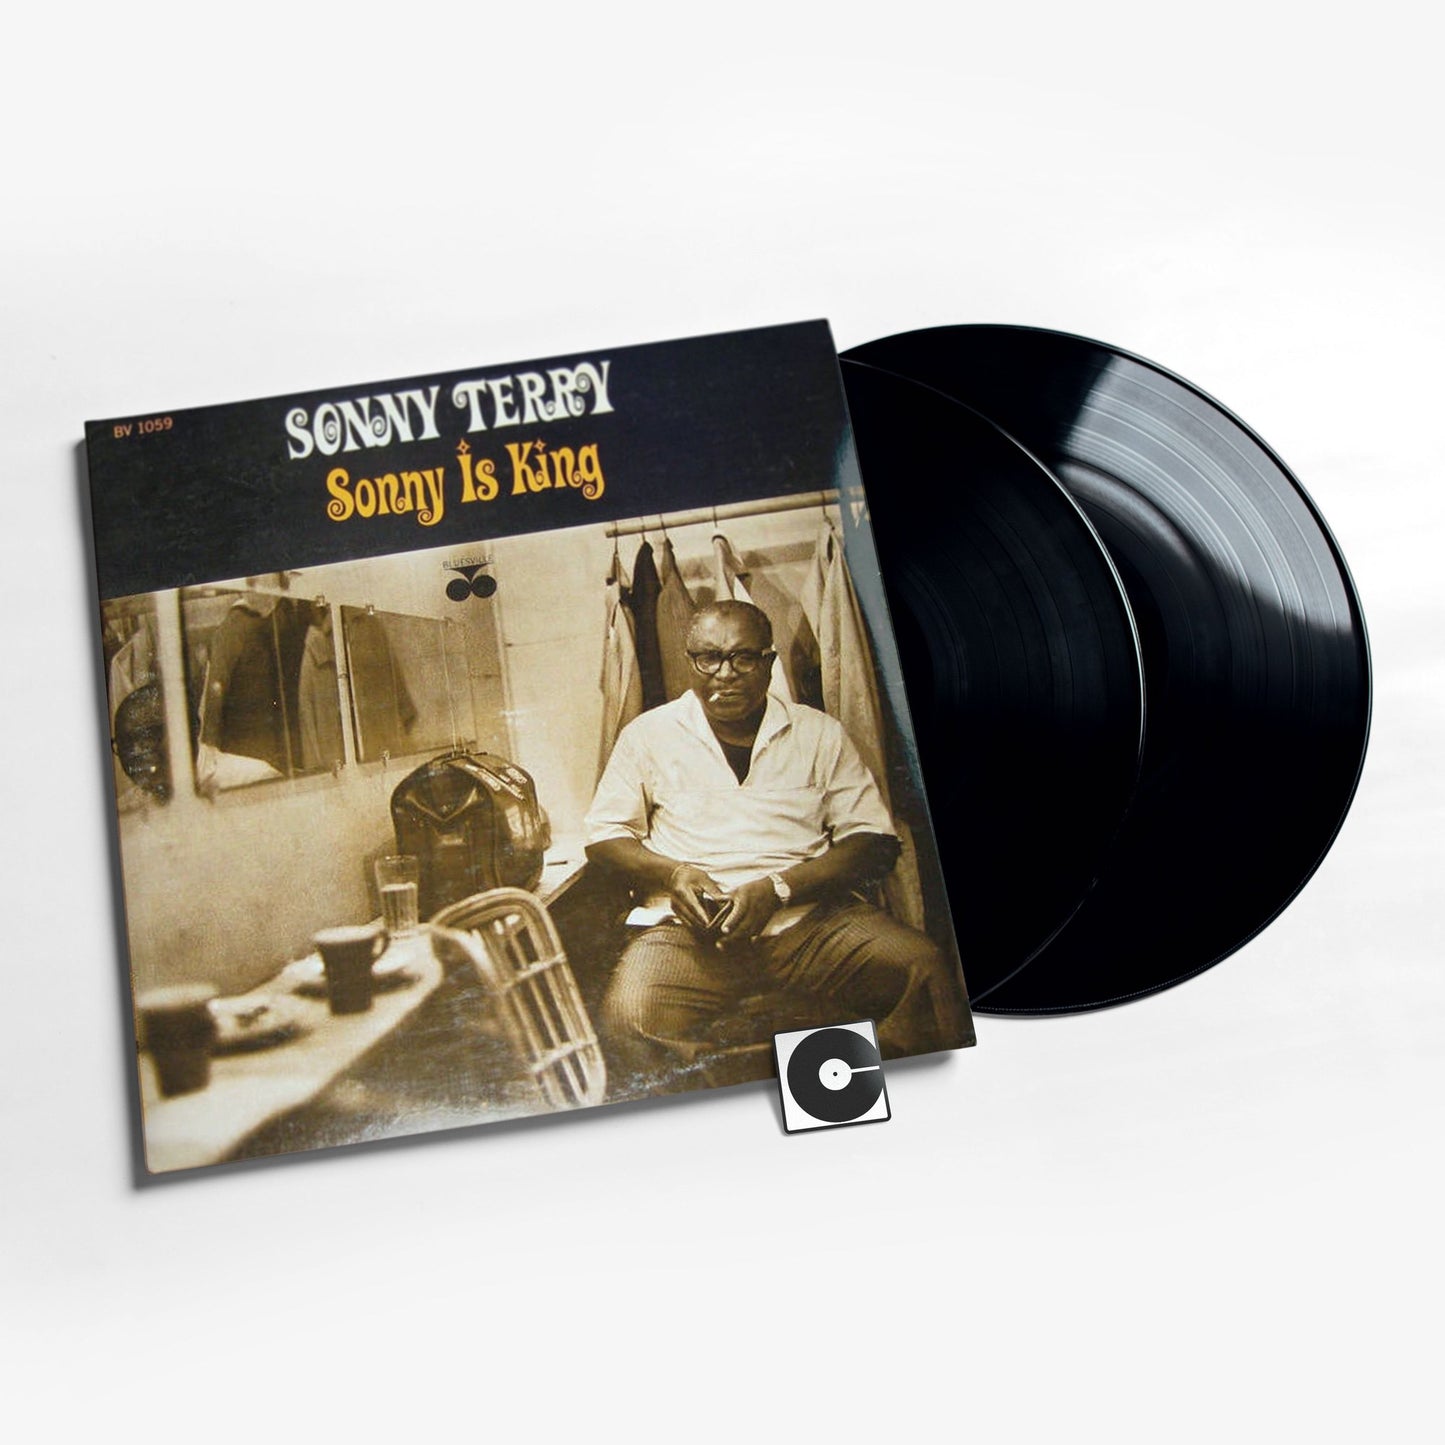 Sonny Terry - "Sonny Is King" Analogue Productions